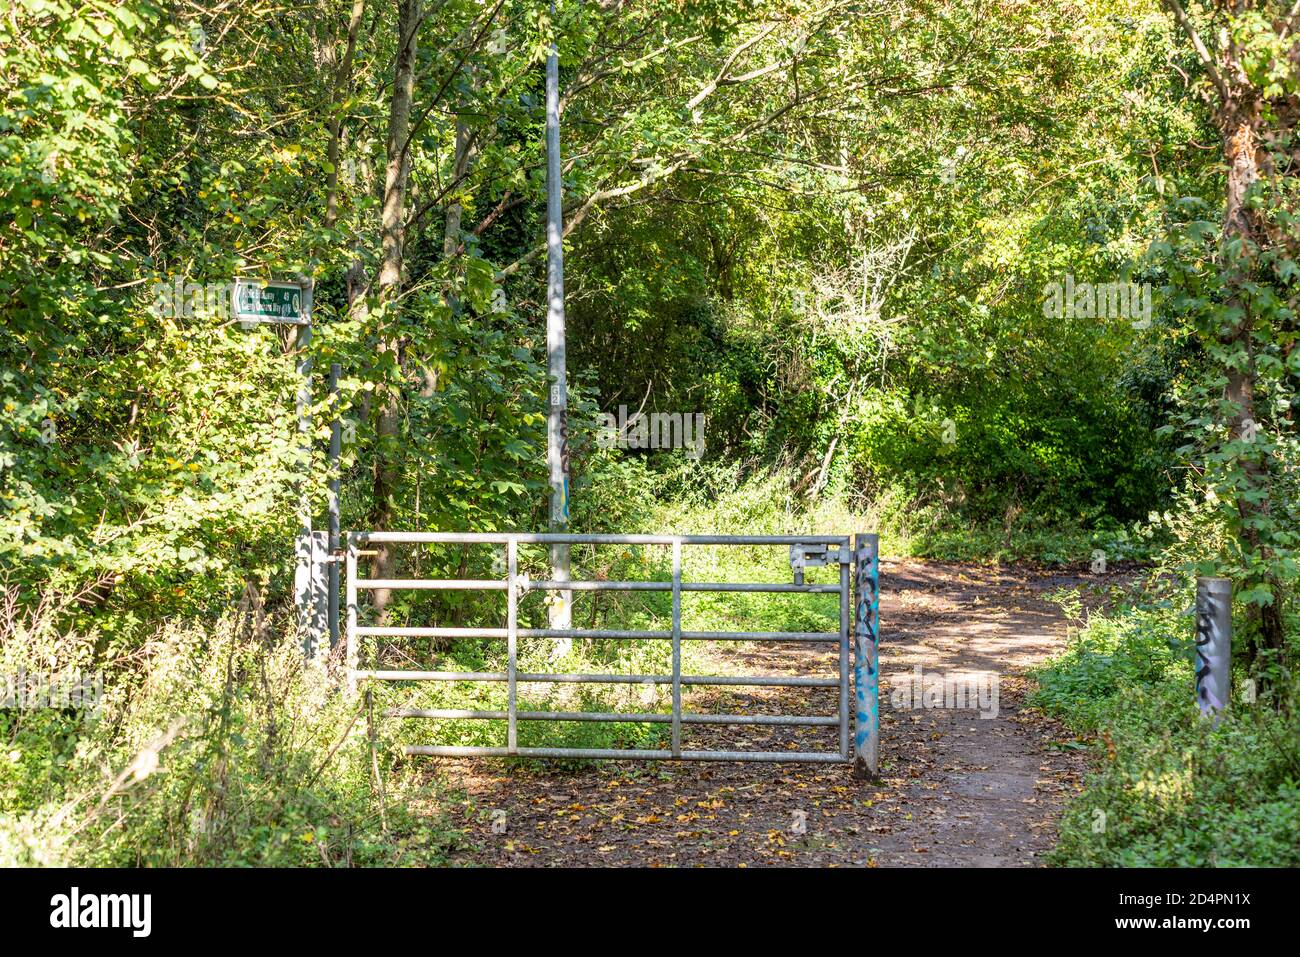 Public bridleway 49, Cherry Orchard Way, Rochford, Southend on Sea, Essex, UK. Mixed suburban and rural area woodland walk, wooded bridleway Stock Photo